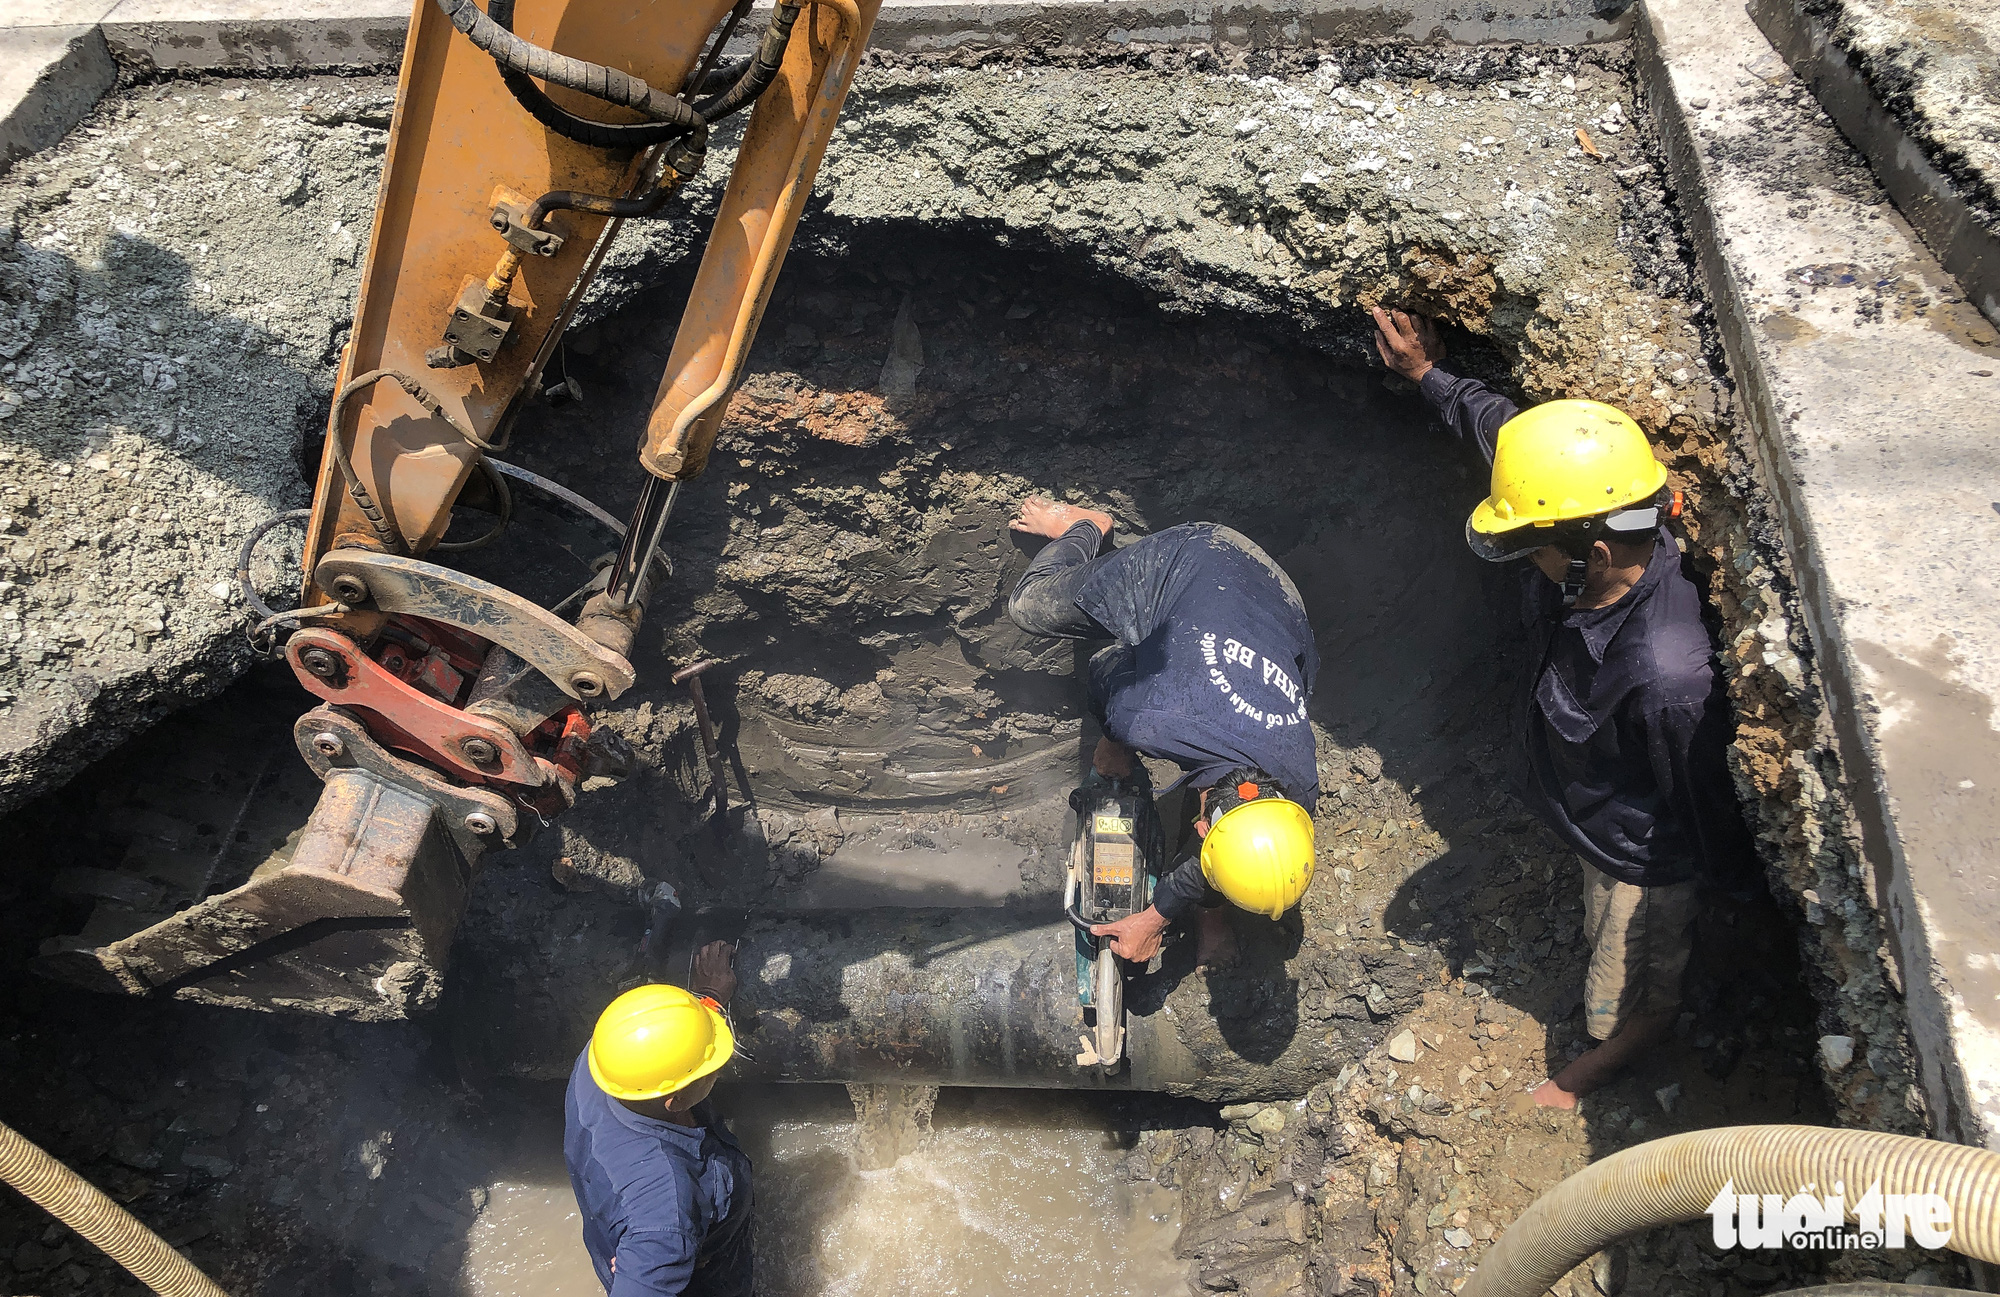 Workers fix a sinkhole on Huynh Tan Phat Street in District 7, Ho Chi Minh City, April 16, 2021. Photo: Chau Tuan / Tuoi Tre